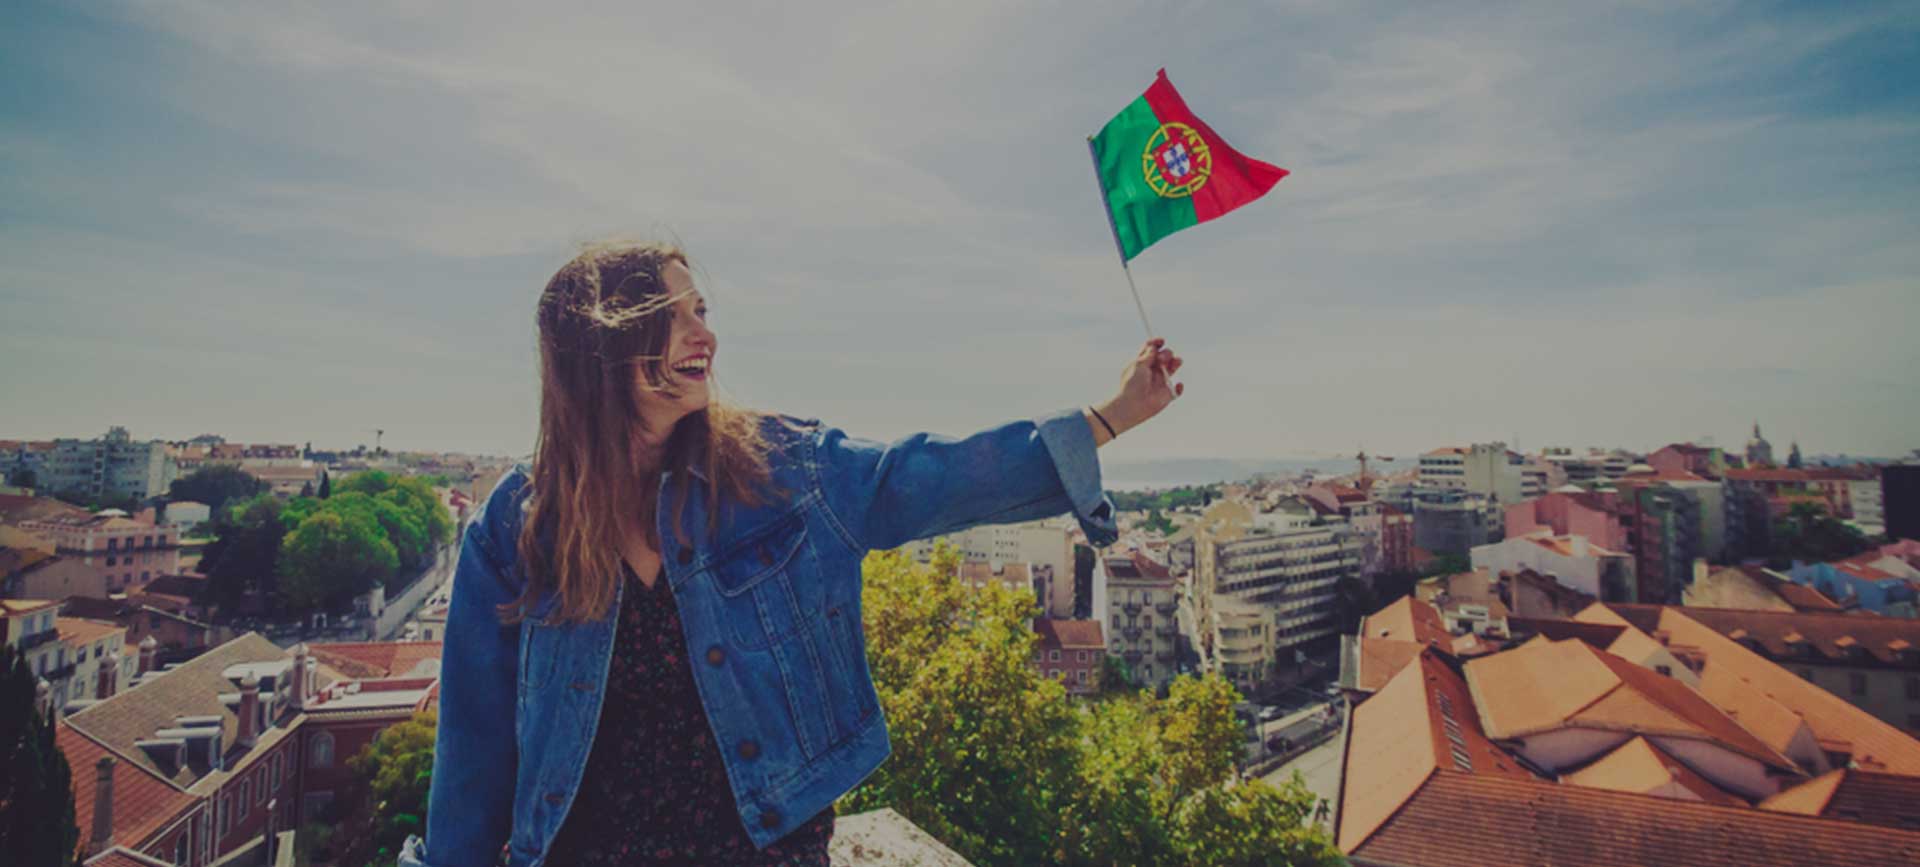 Are you living in Portugal for a year?